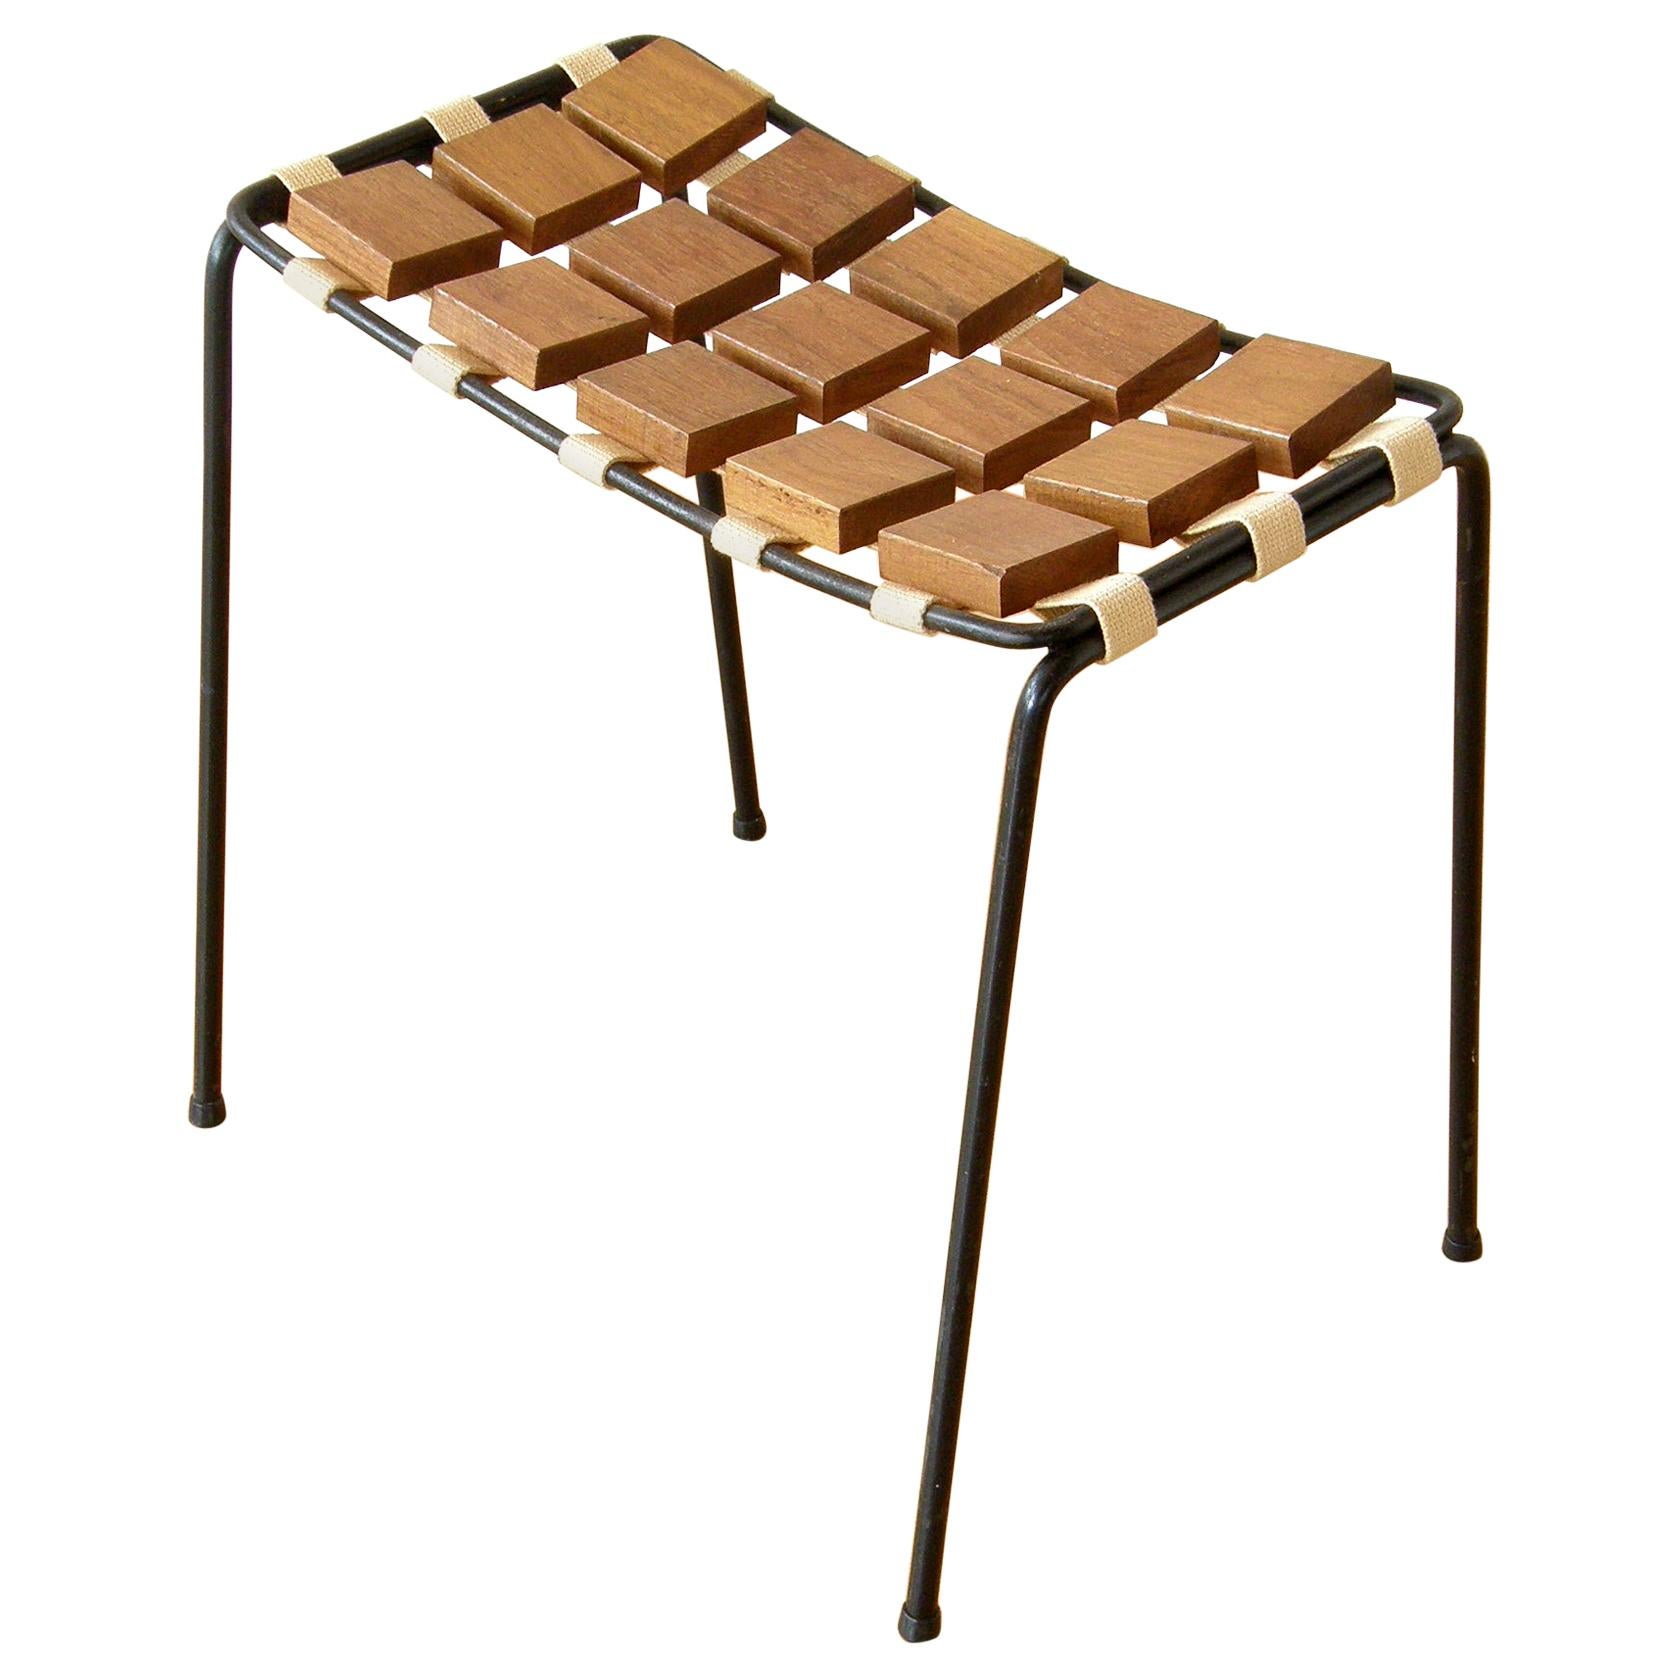 Maxwell Yellen "Checkerboard Collection" Iron Frame and Wood Stool, circa 1953